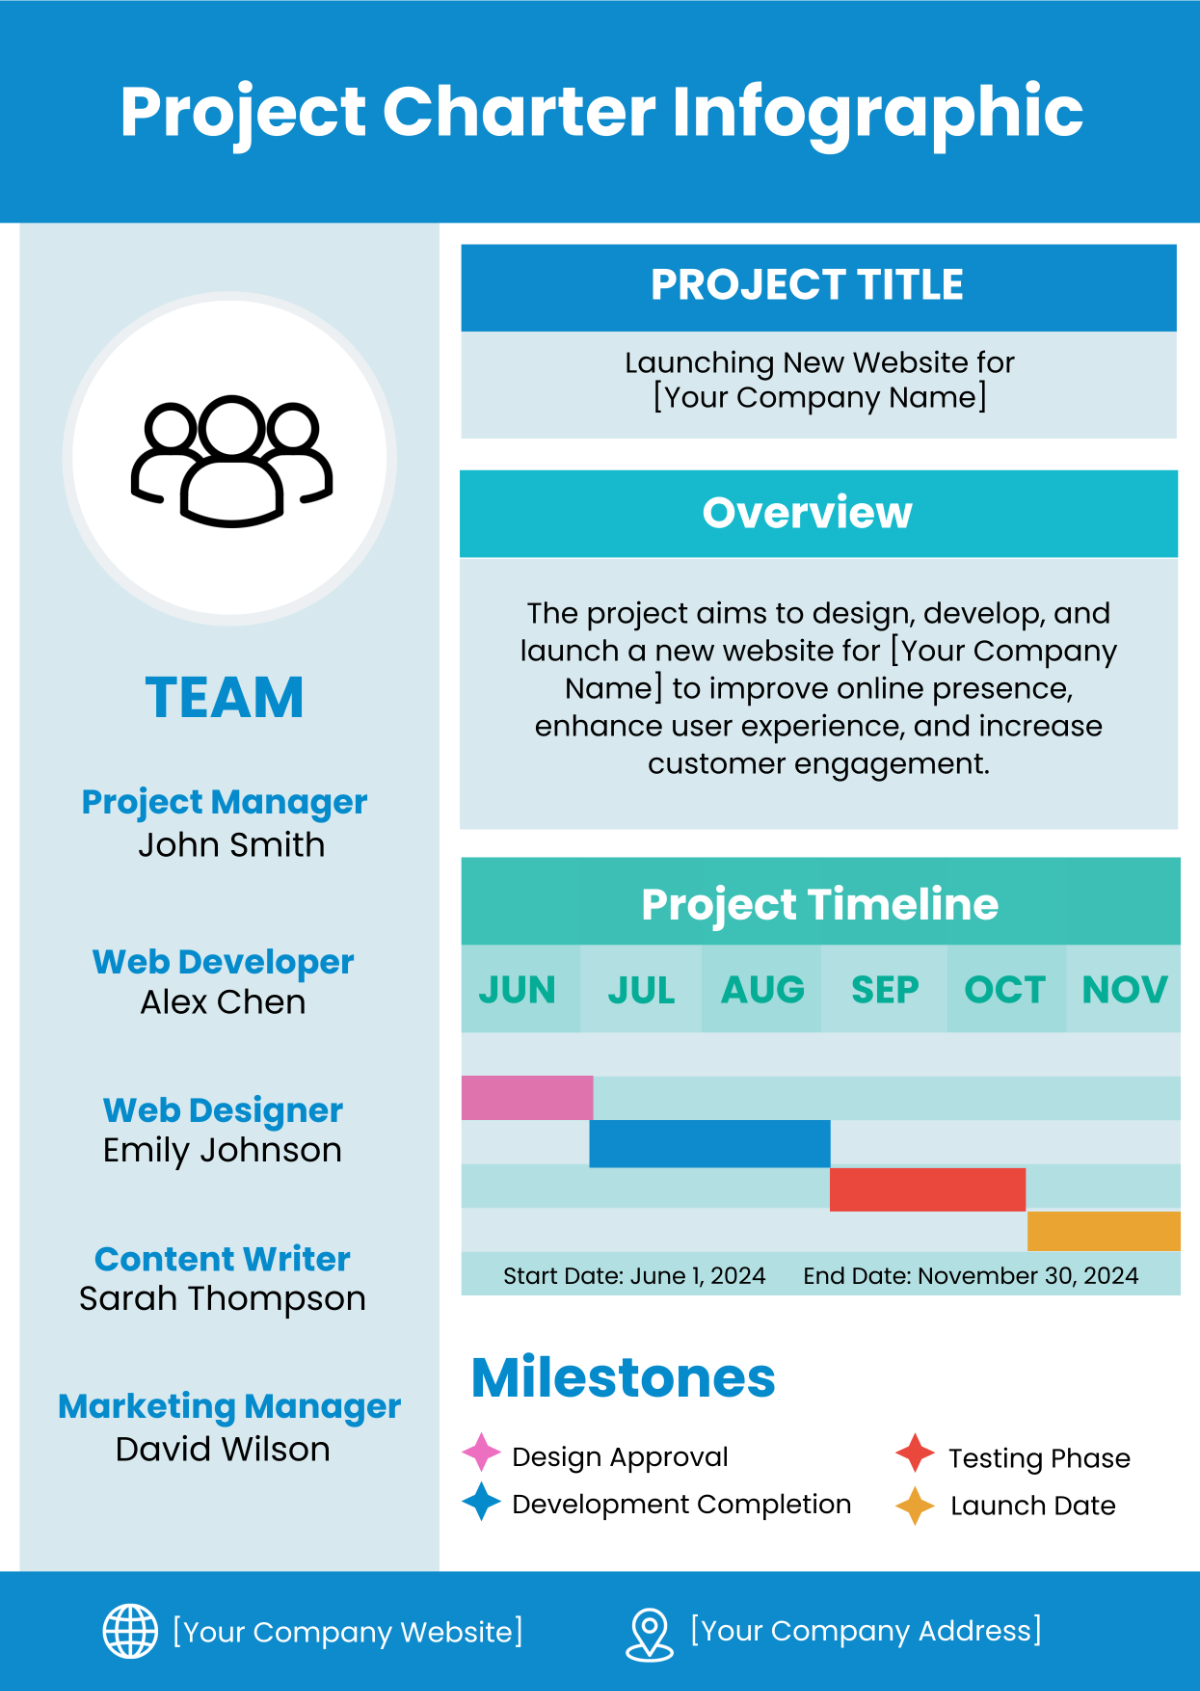 Free Project Charter Infographic Template